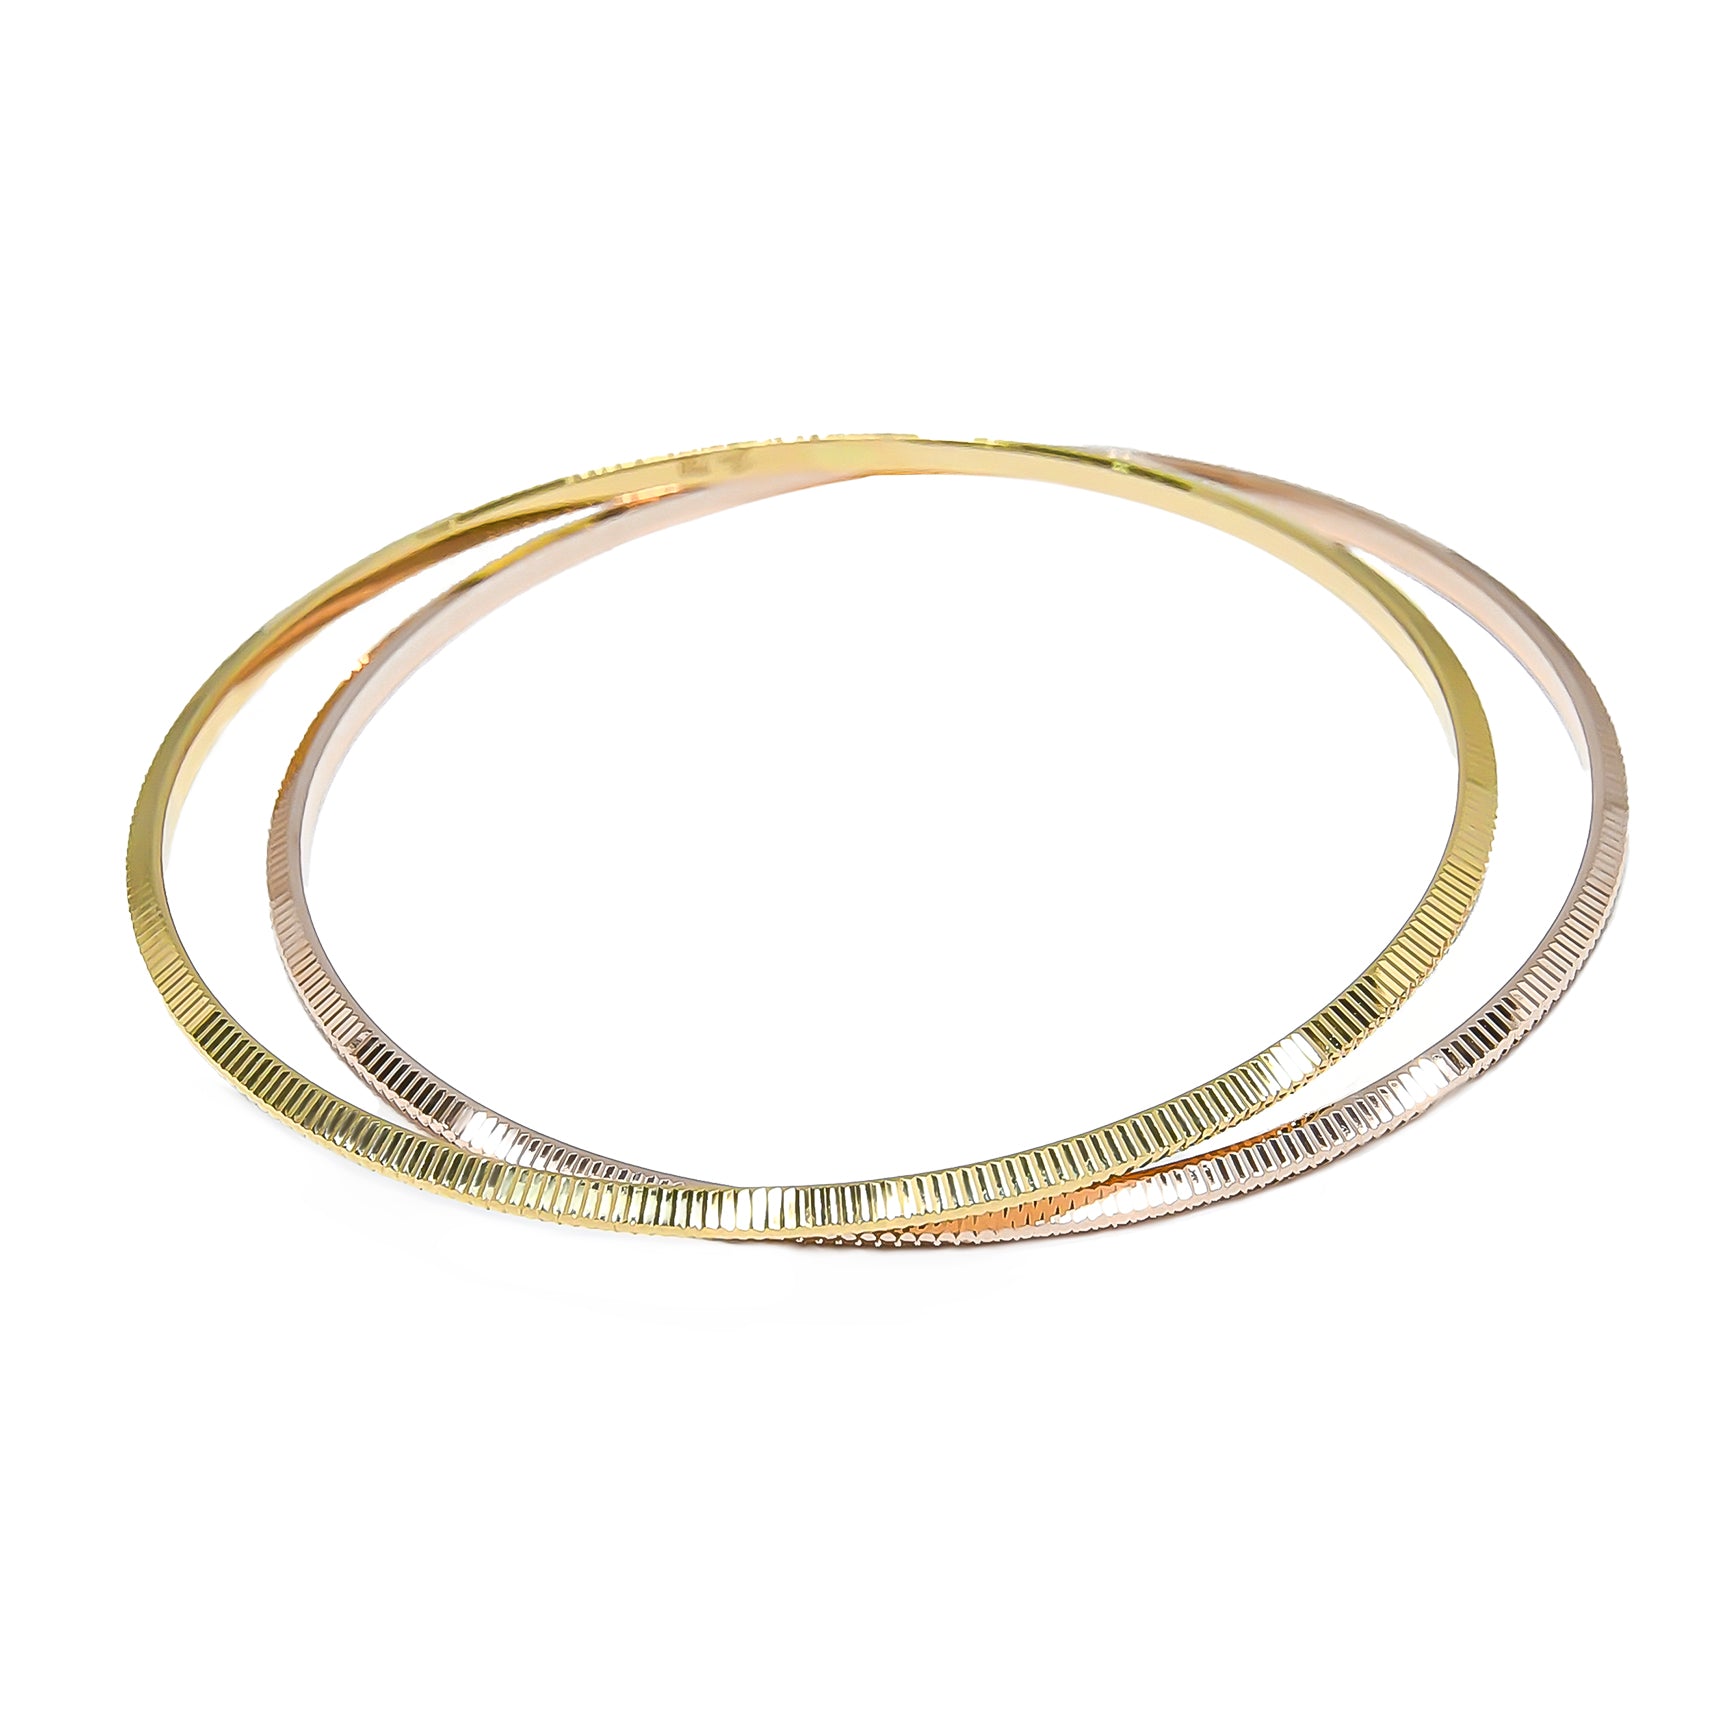 Bracelet EARTH IS ROUND 2mm profil triangle or jaune 18k 750